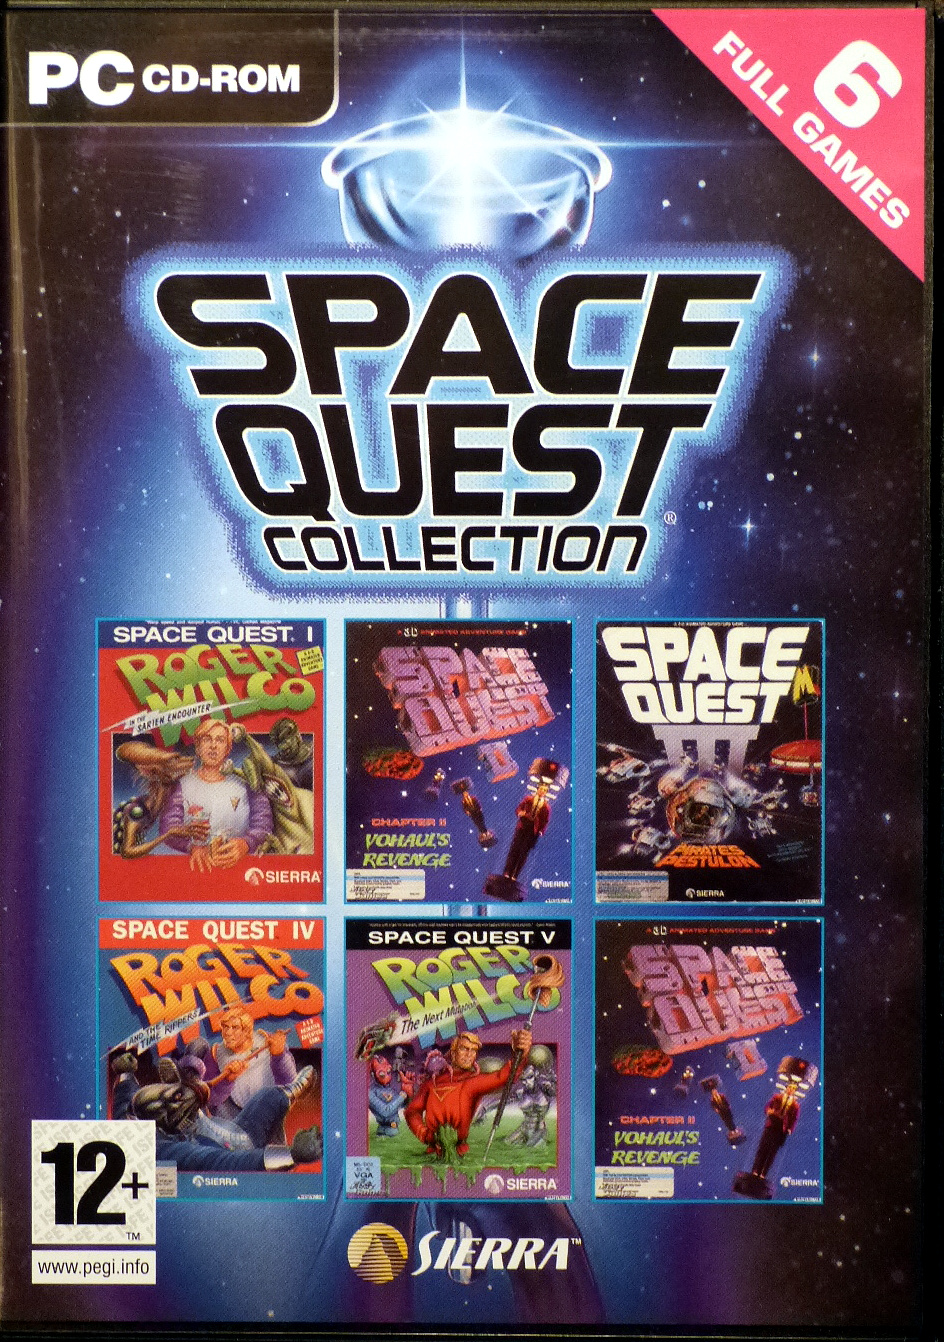 Space quest collection 2017 pc iso